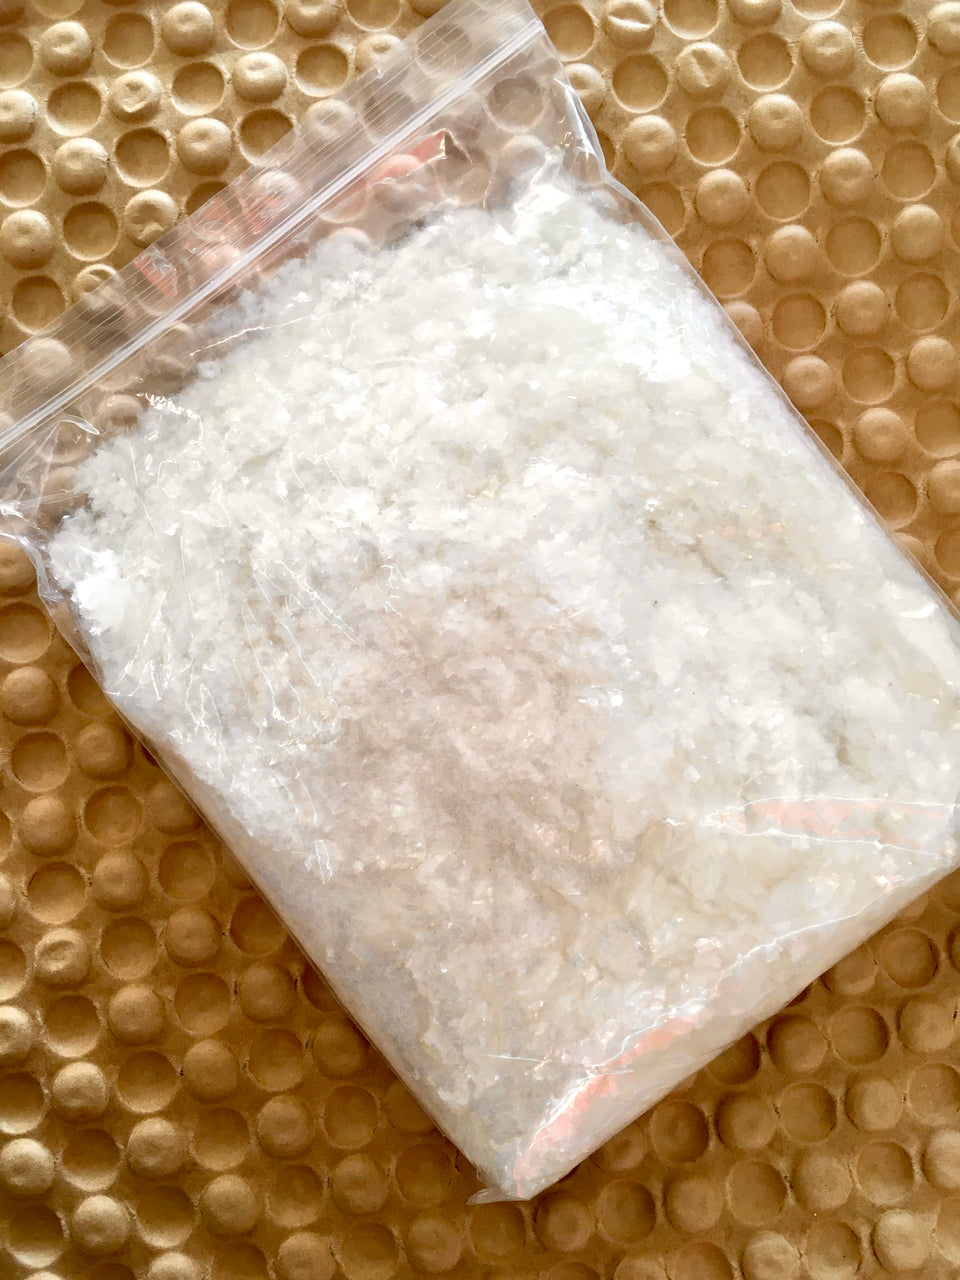 shows the snow in a zip loc type bag